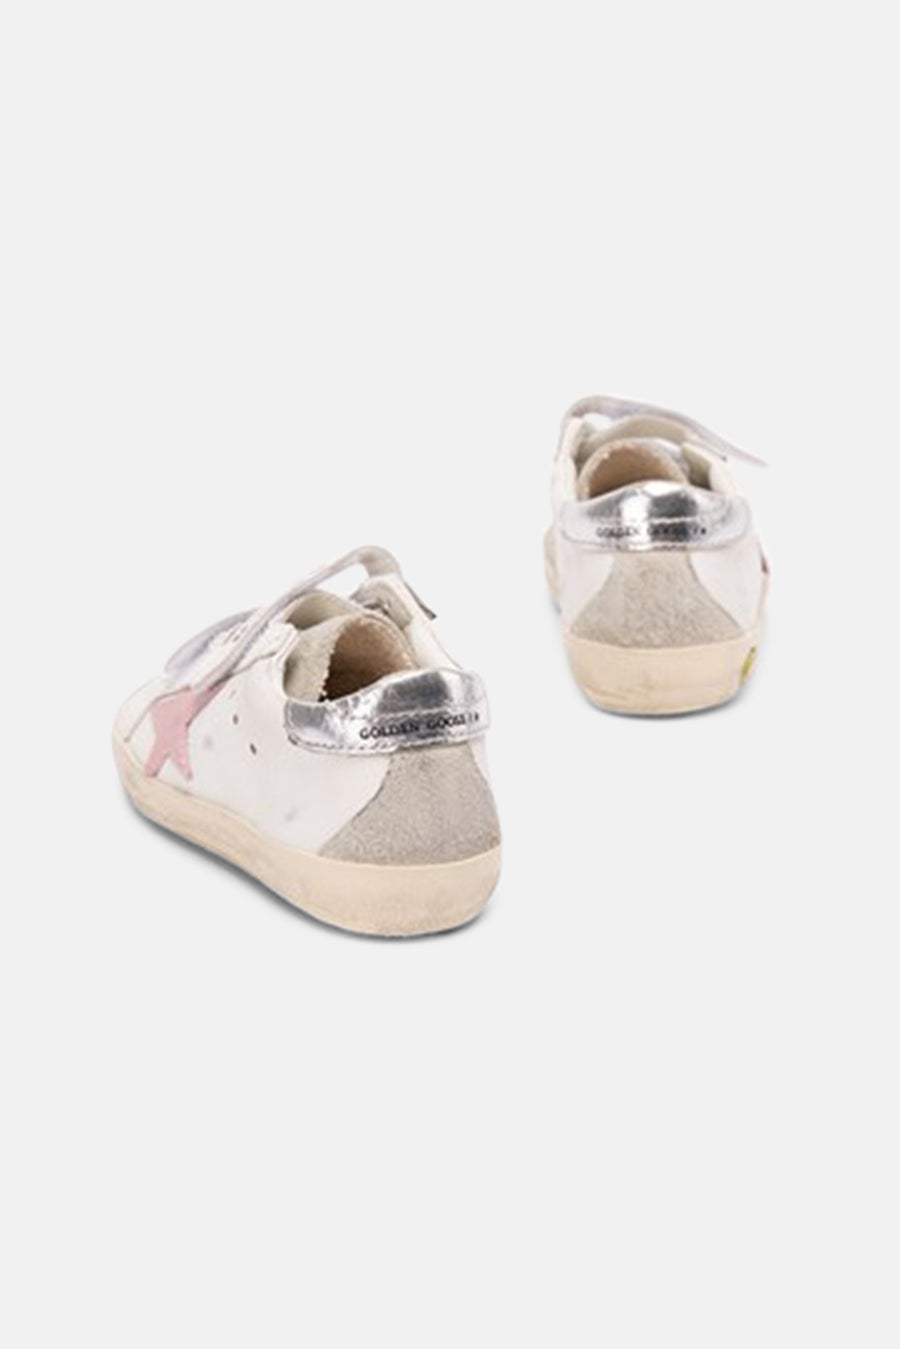 Toddler Old School Sneakers White/Orchid Pink